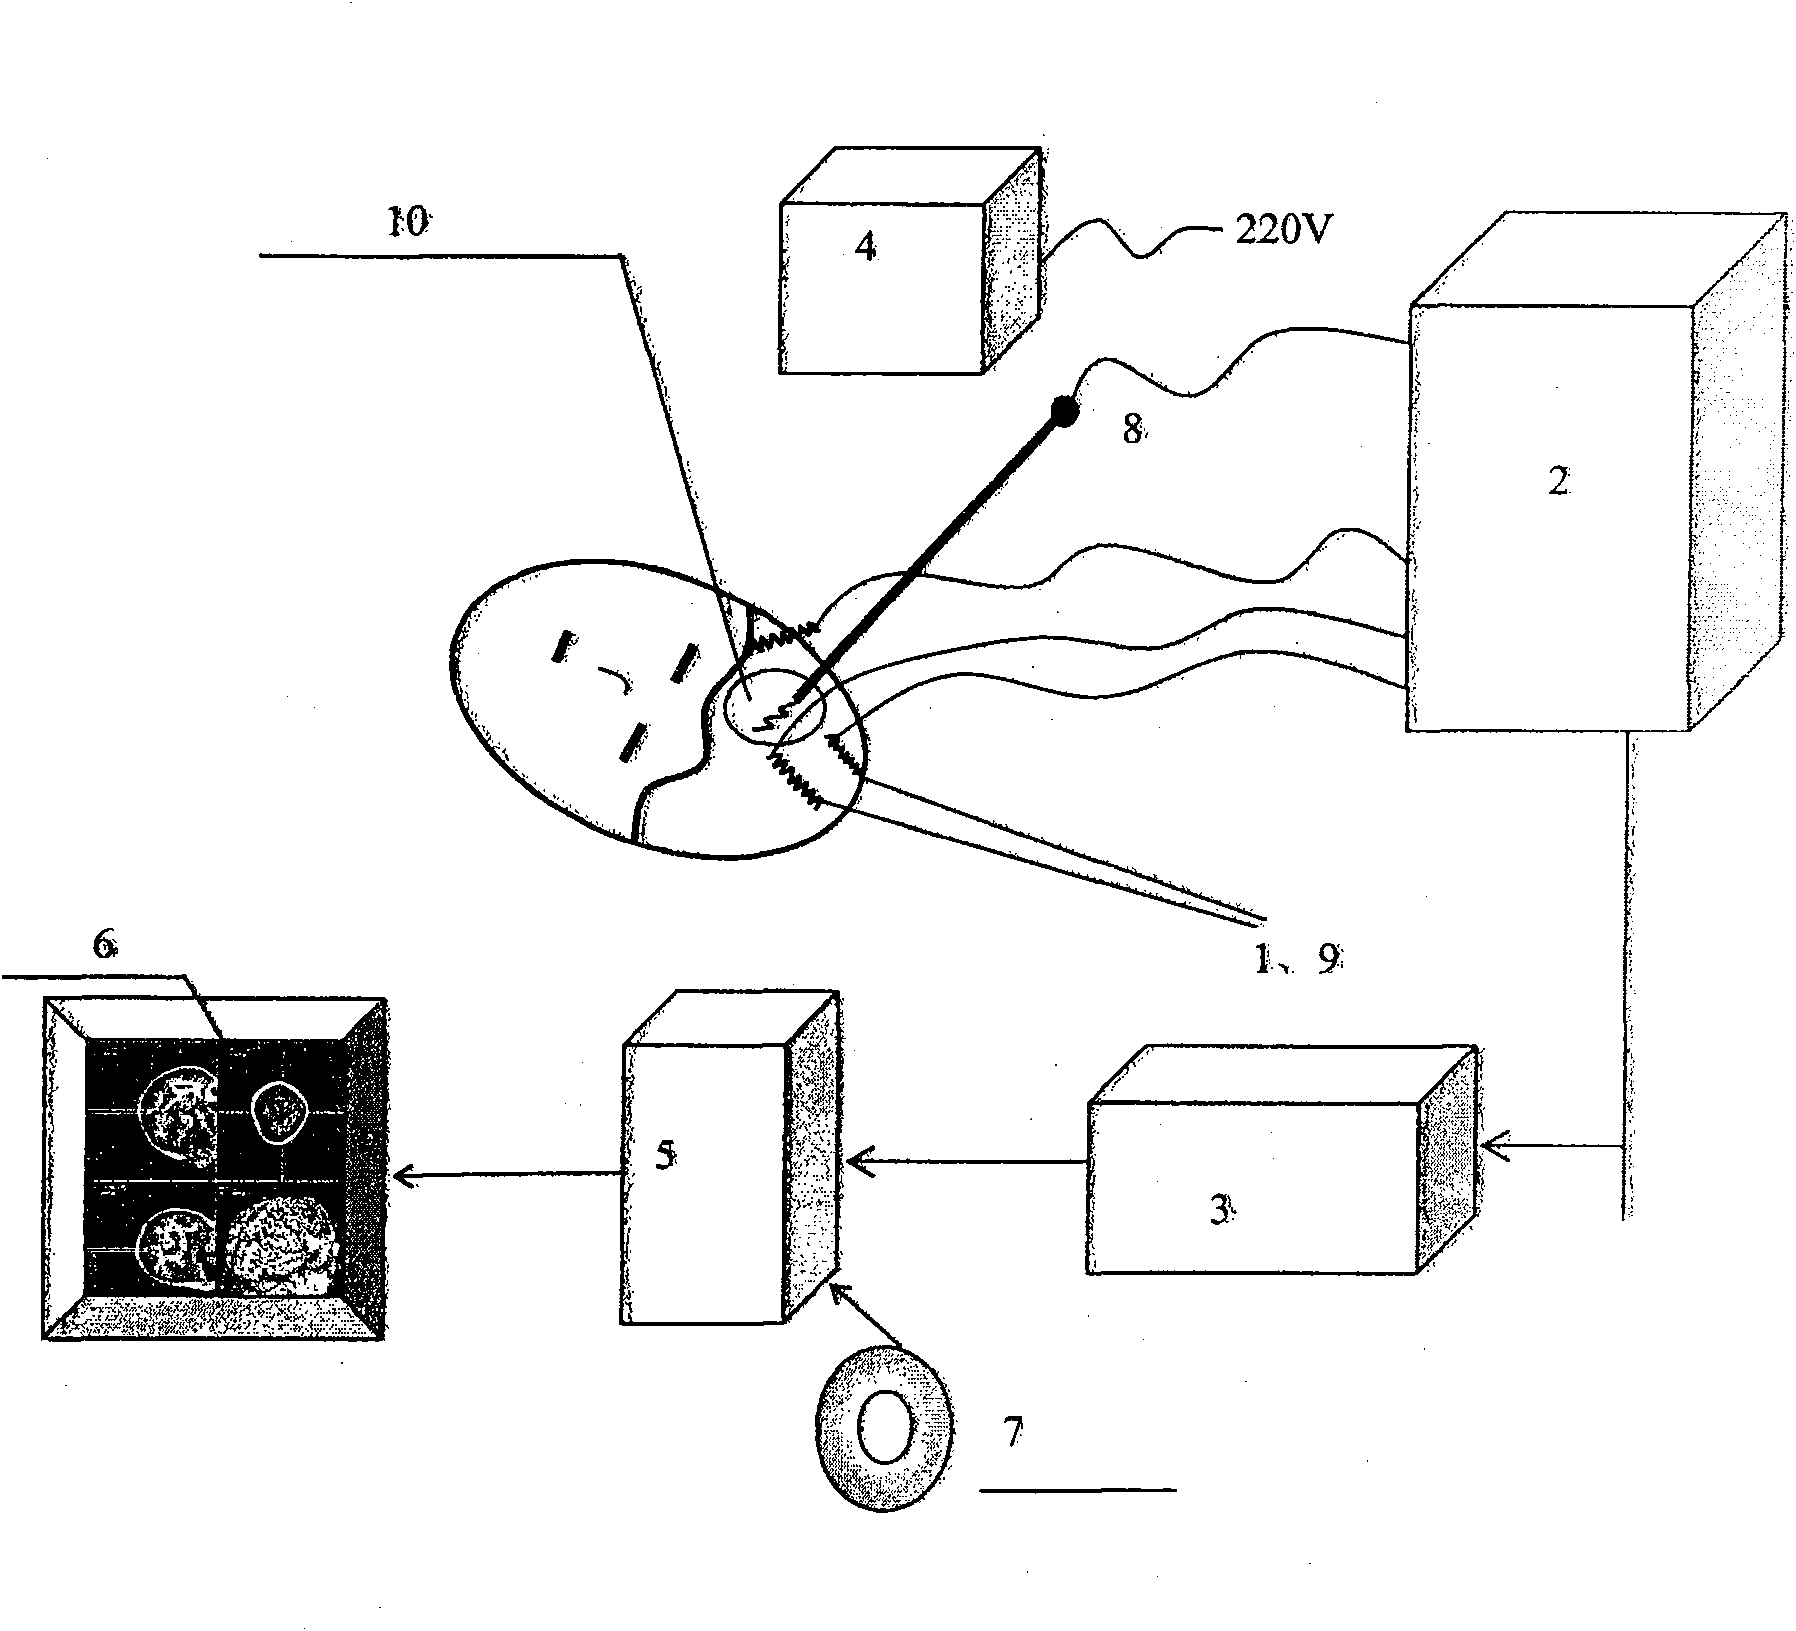 Real-time tracing positioning apparatus